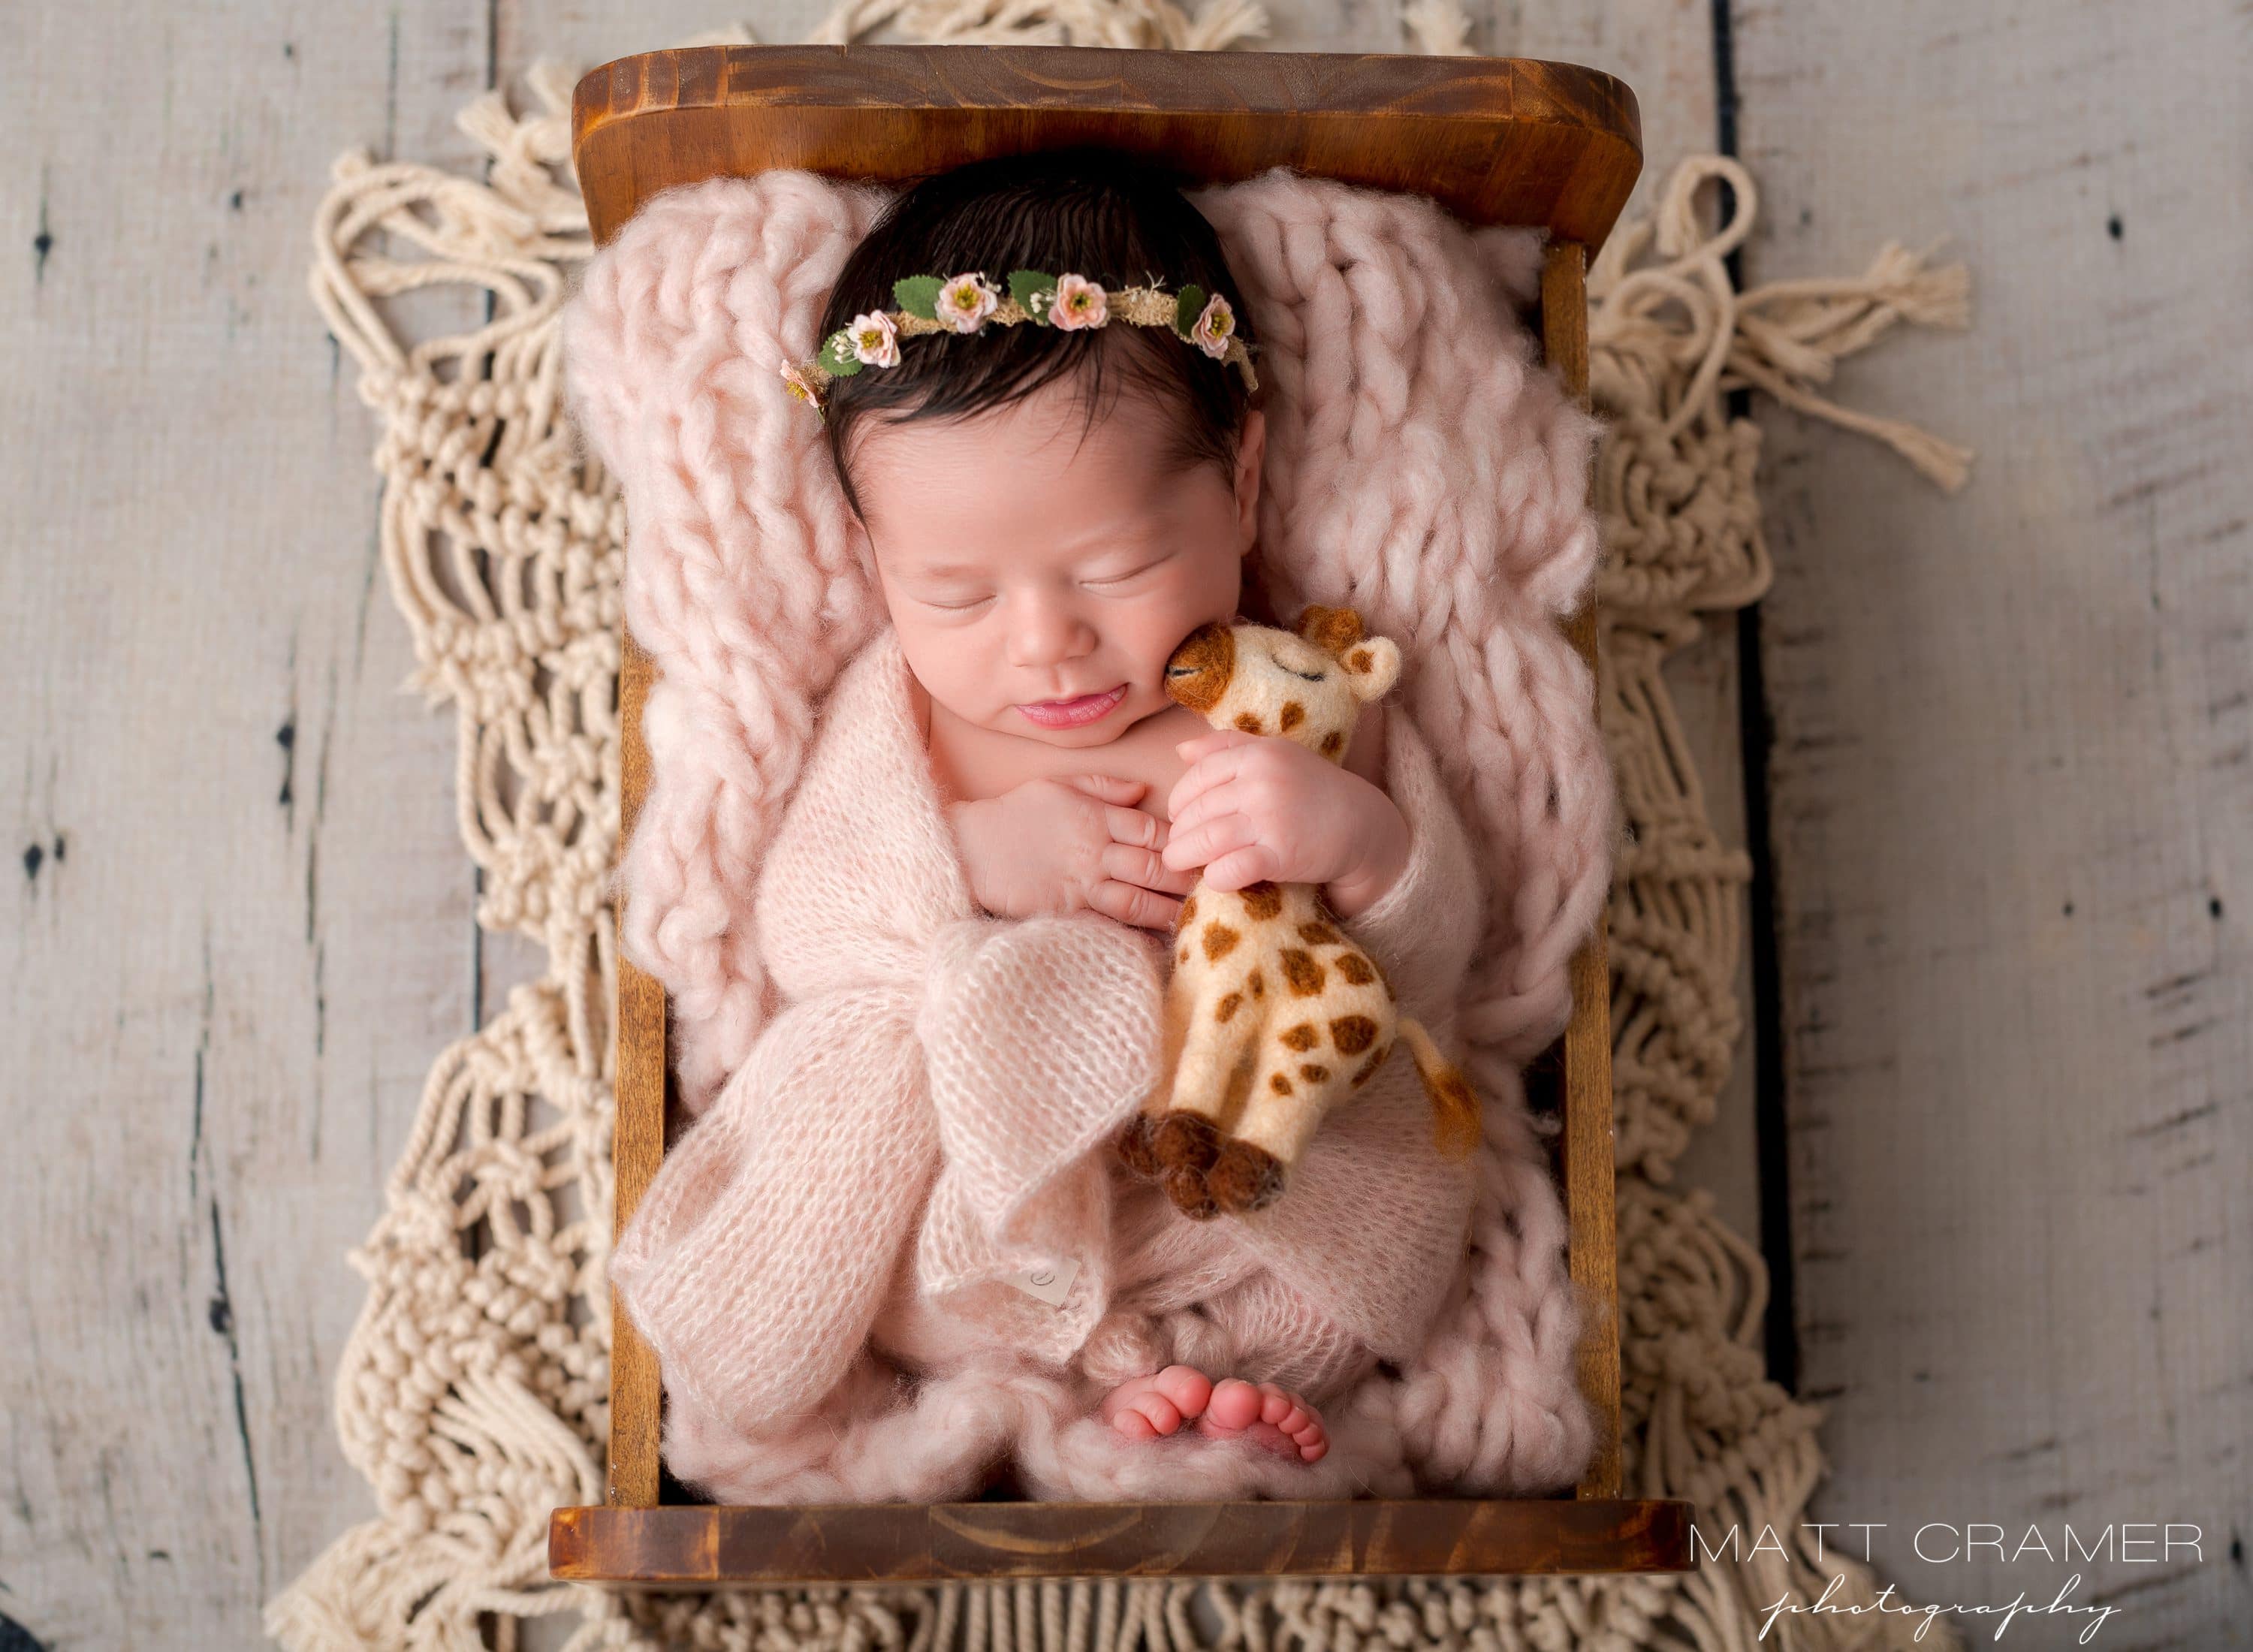 infant girl laying in wood baby bed prop with felted giraffe toy